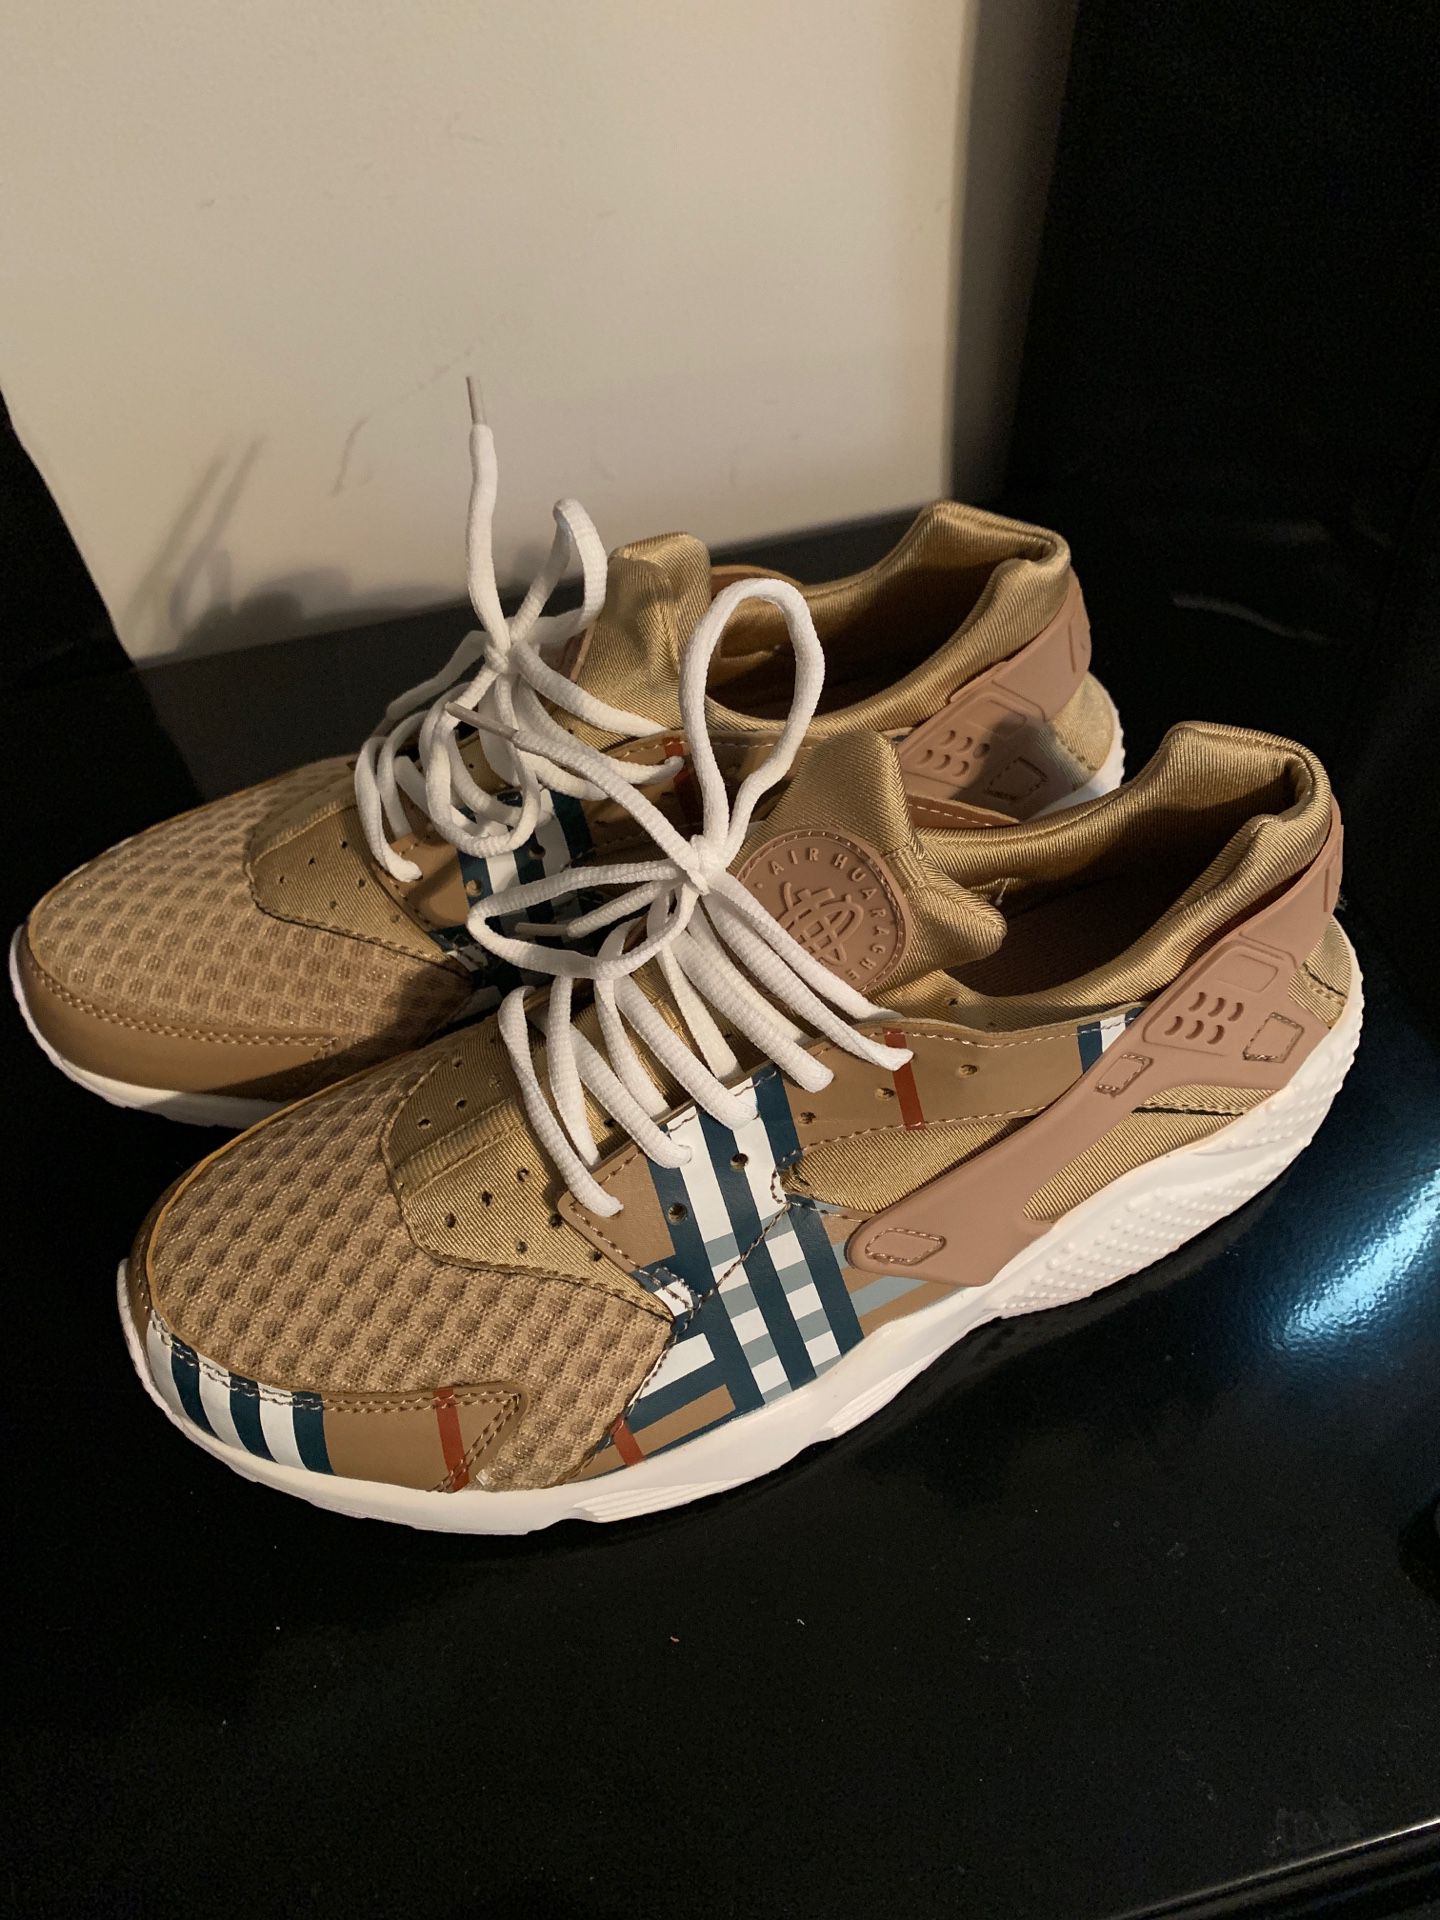 Burberry Huaraches(size 10)